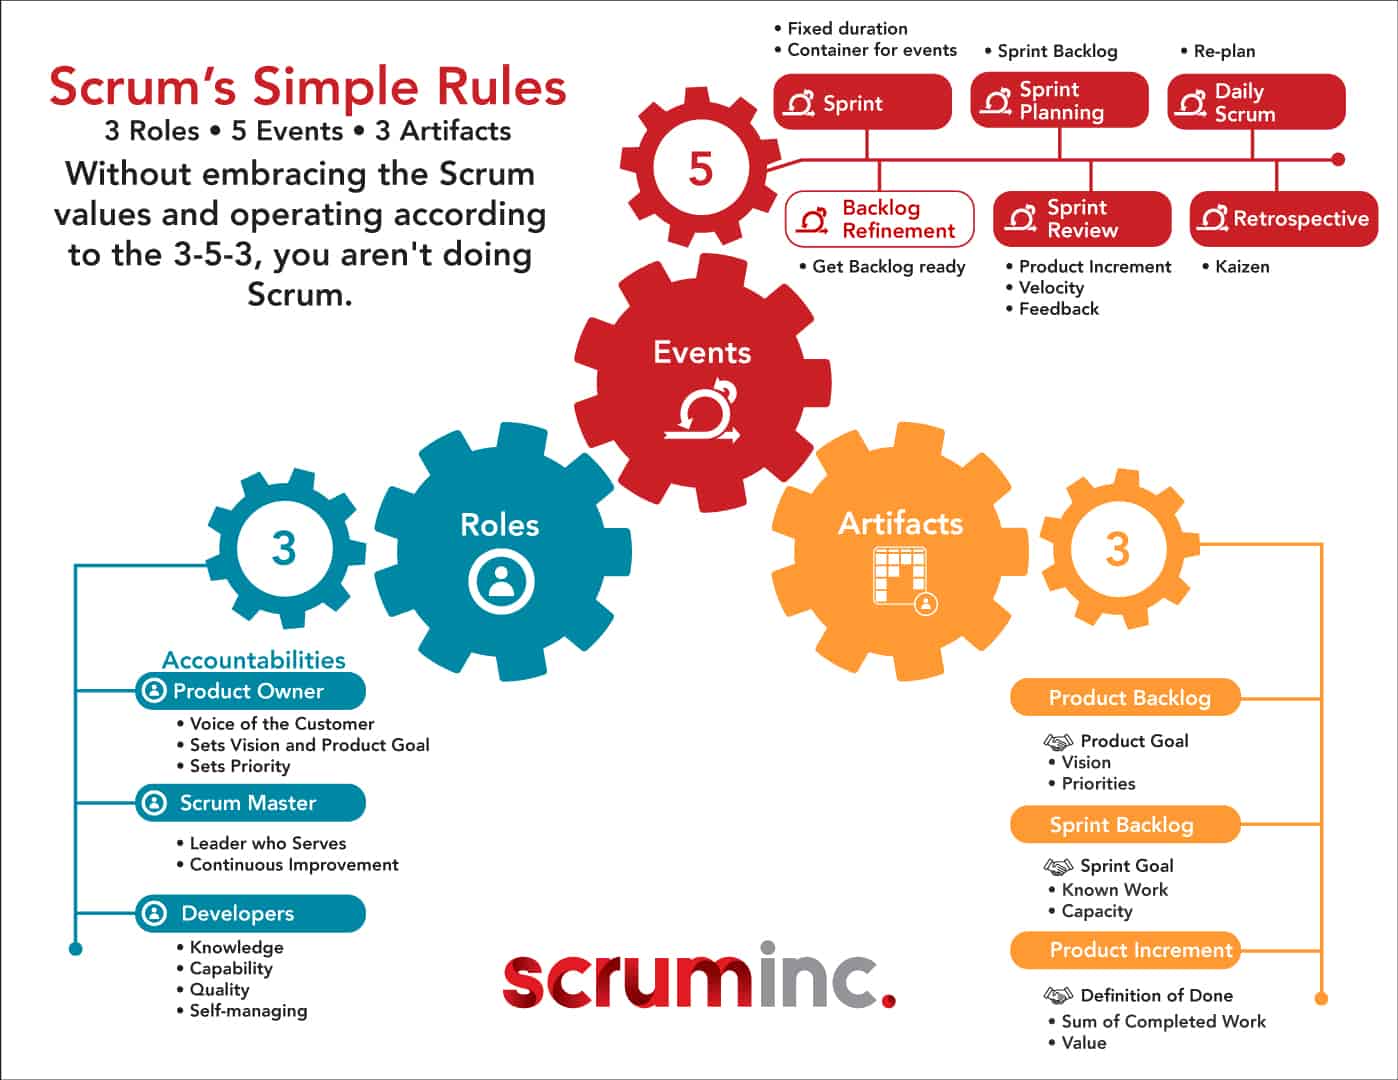 An updated graphic showing the 3-5-3 structure of Scrum as defined in the 2020 Scrum Guide